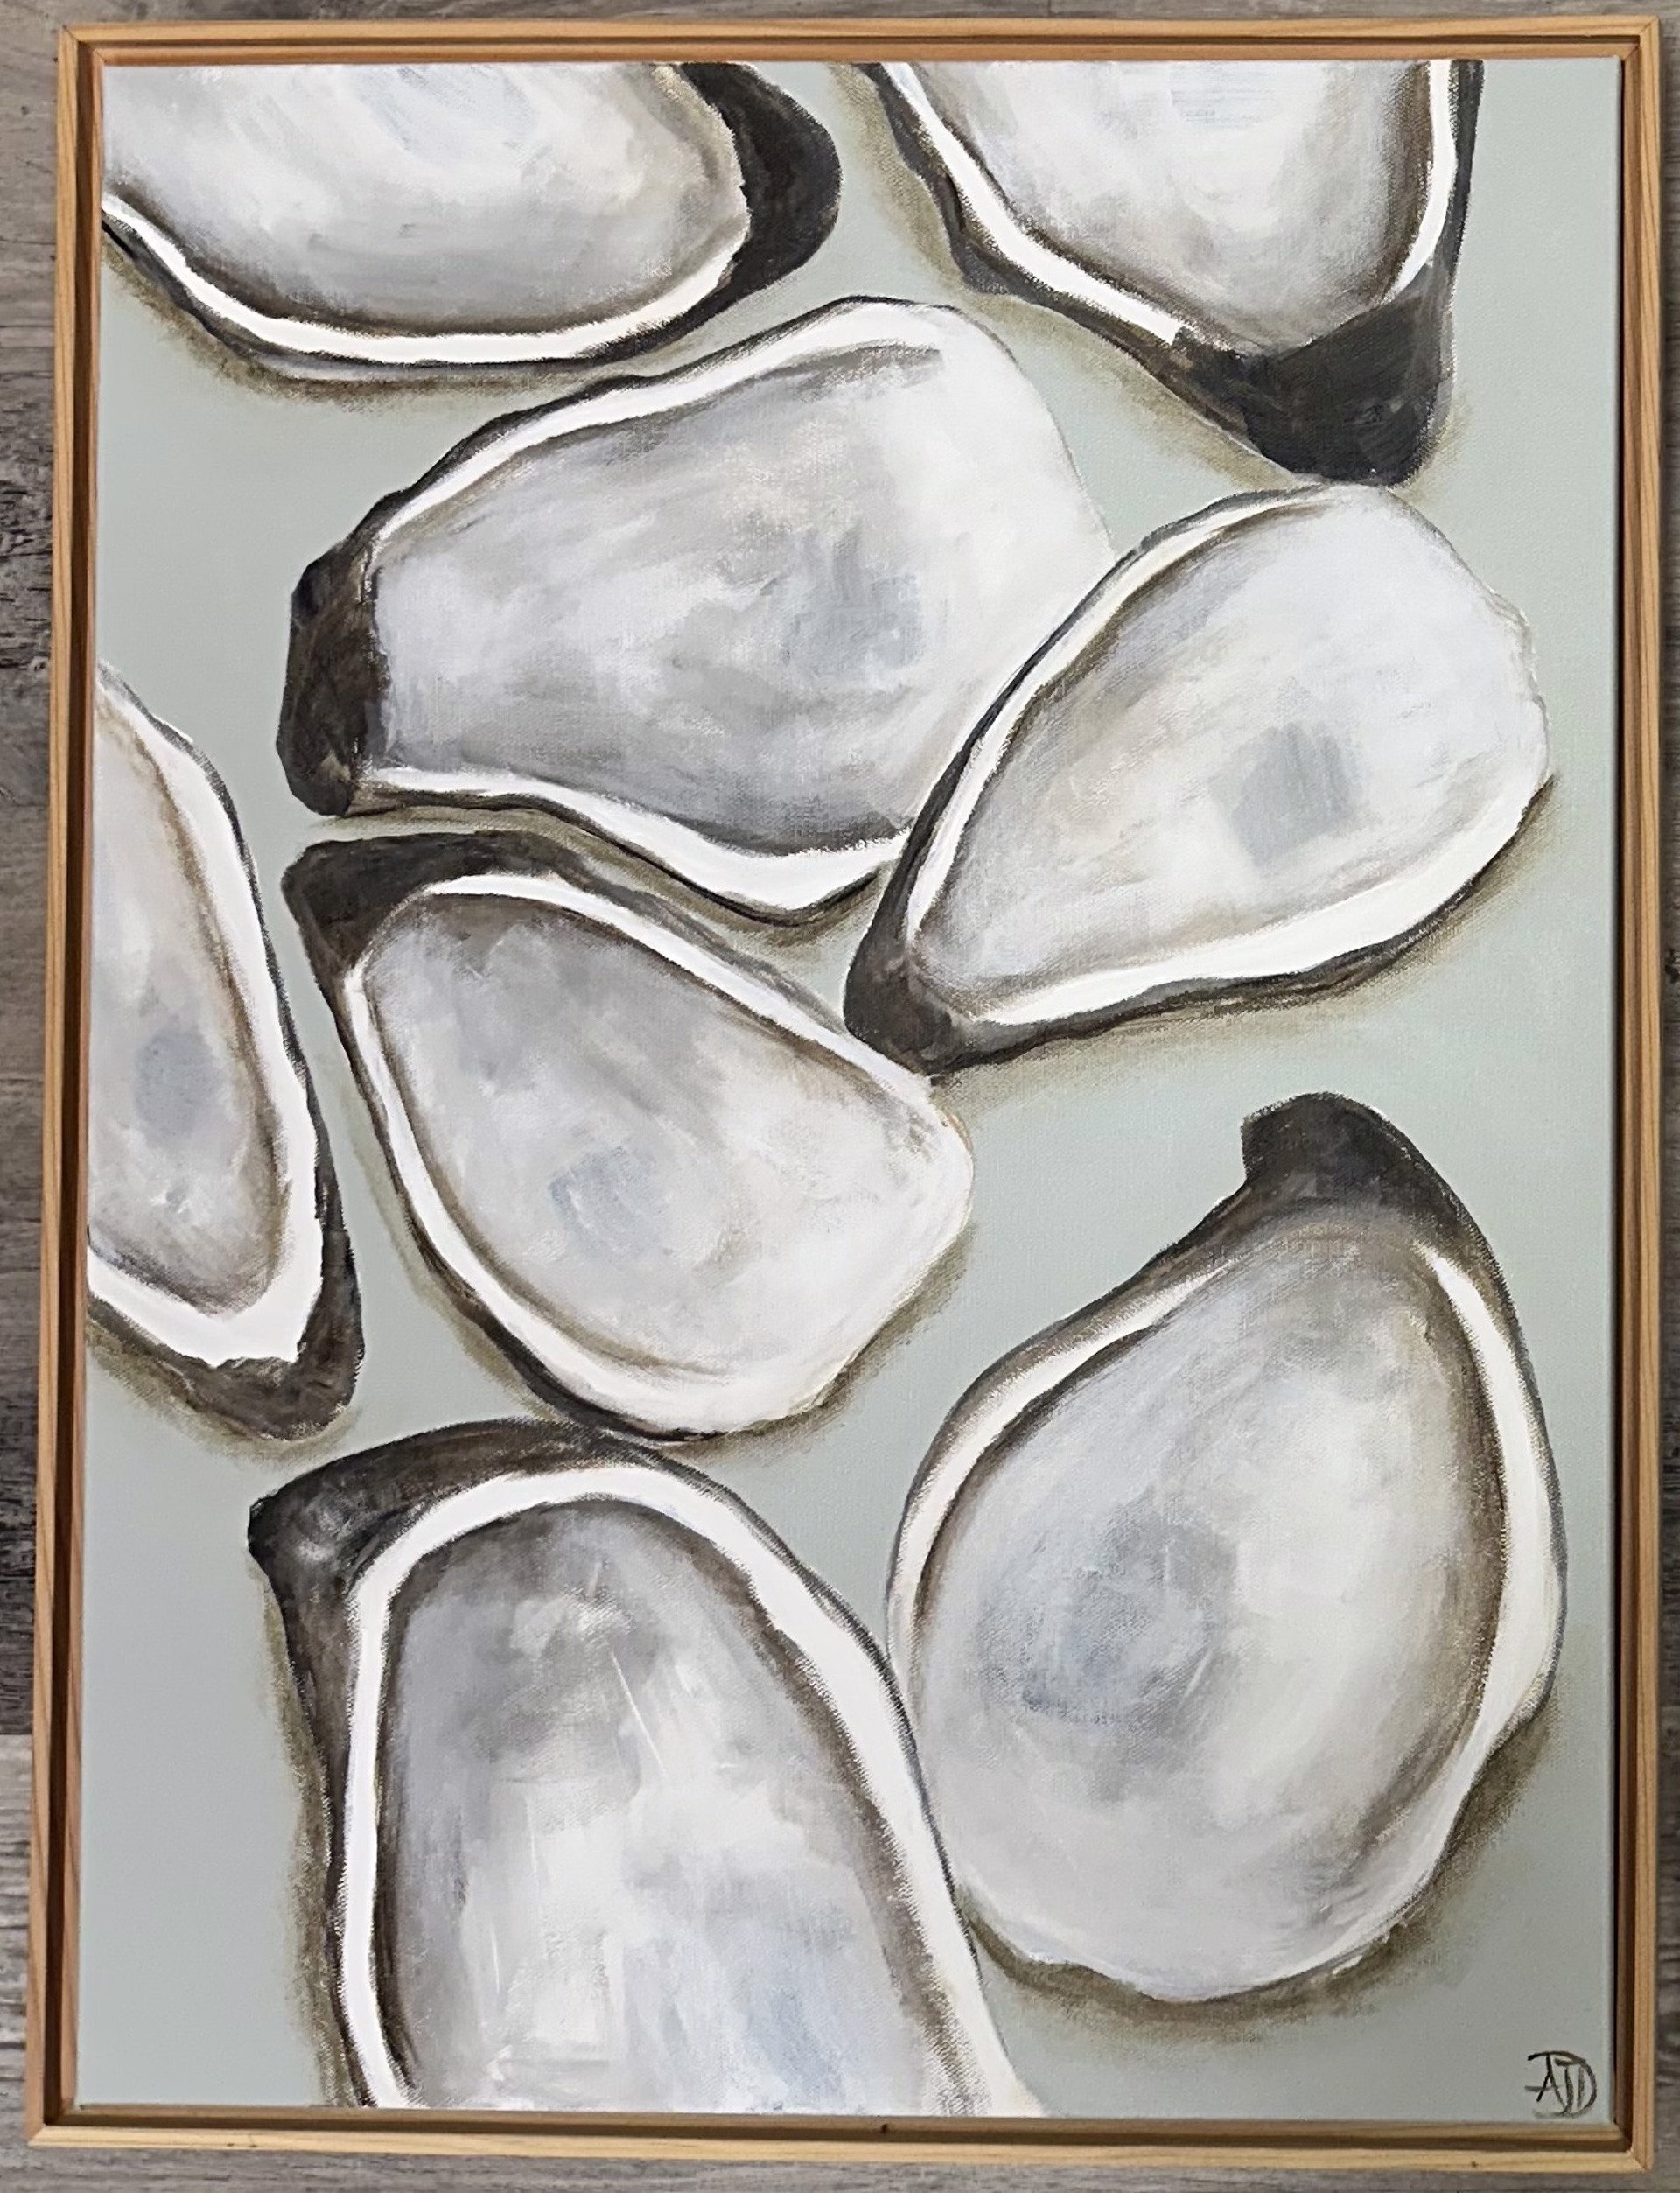 Oysters by Amy Duke